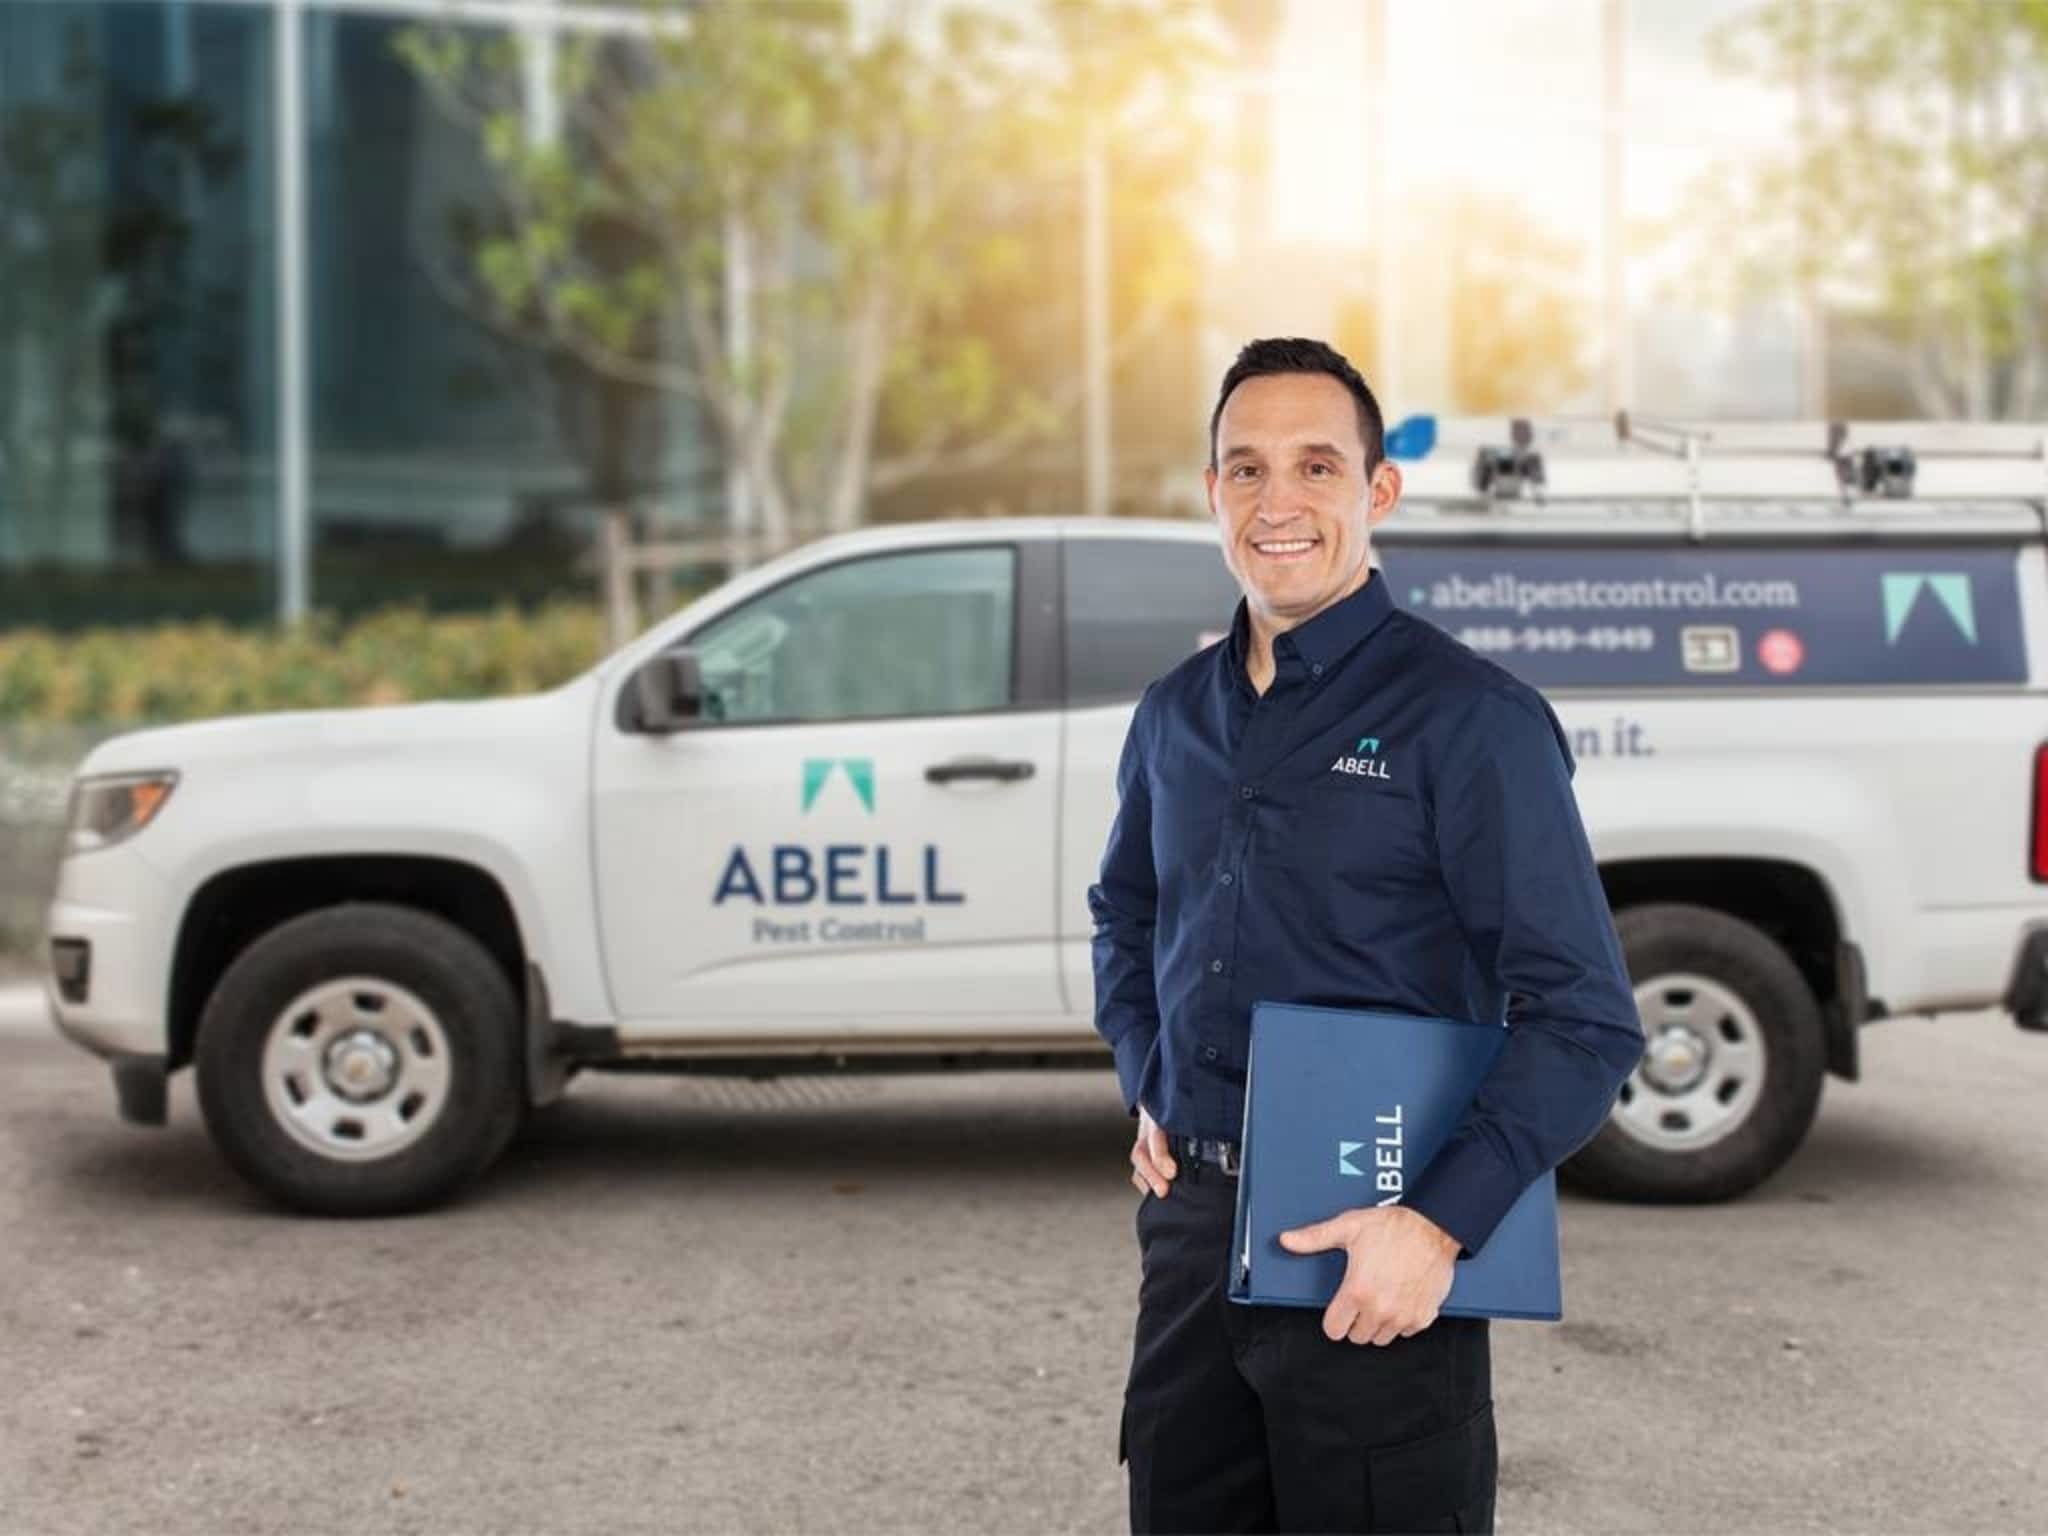 photo Abell Pest Control